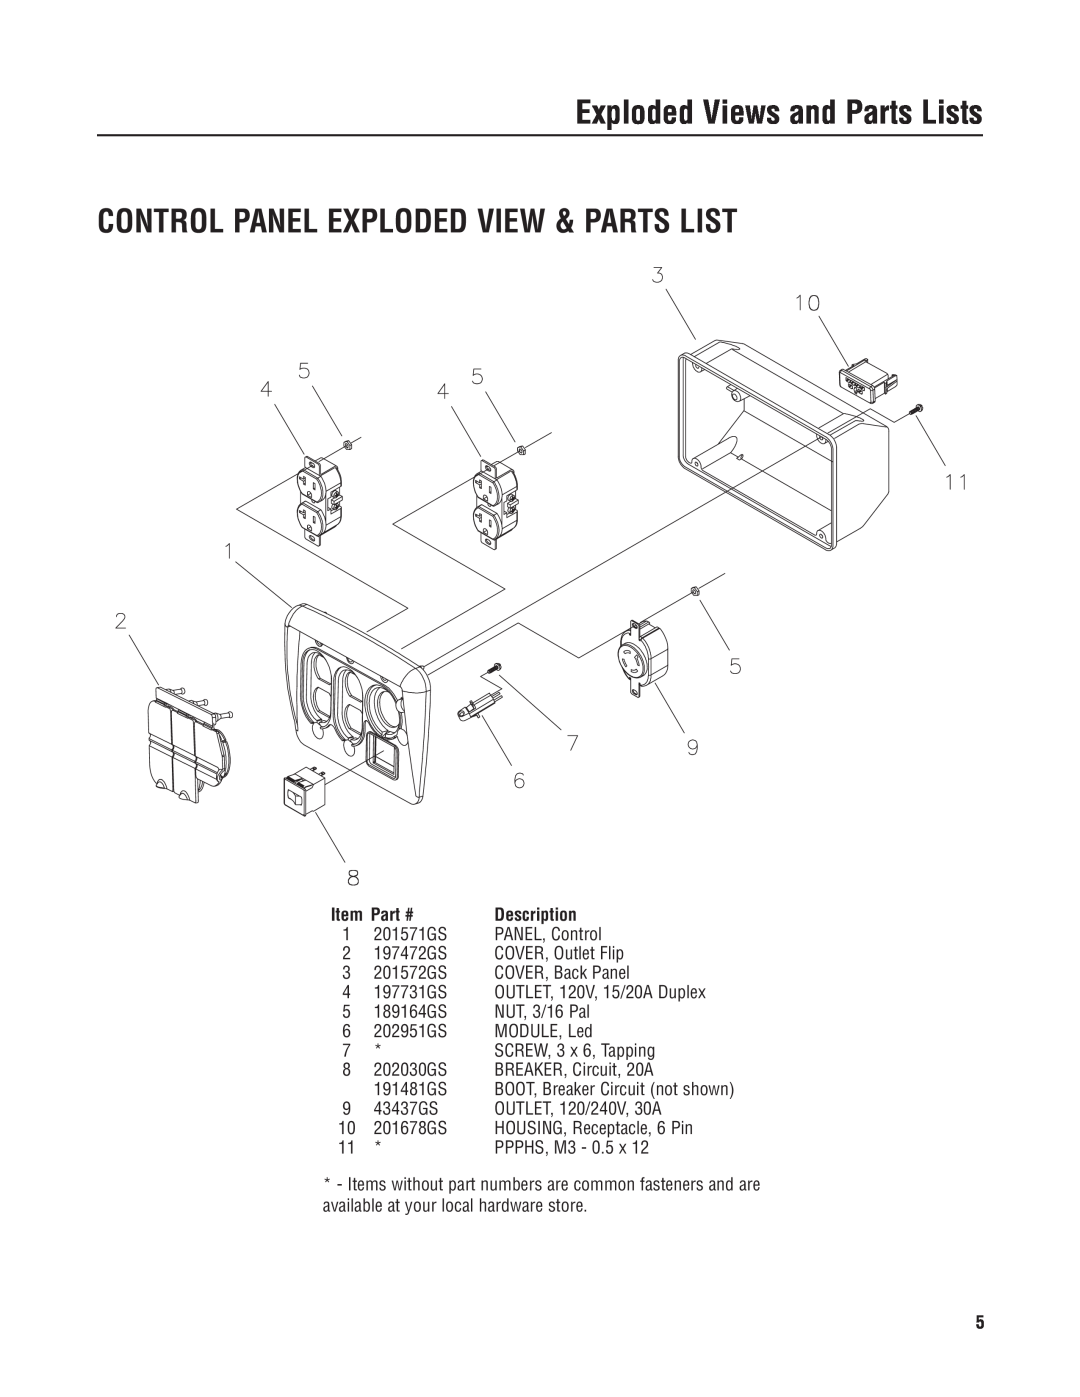 Briggs & Stratton 030380 manual Control Panel Exploded View & Parts List, Exploded Views and Parts Lists, Description 